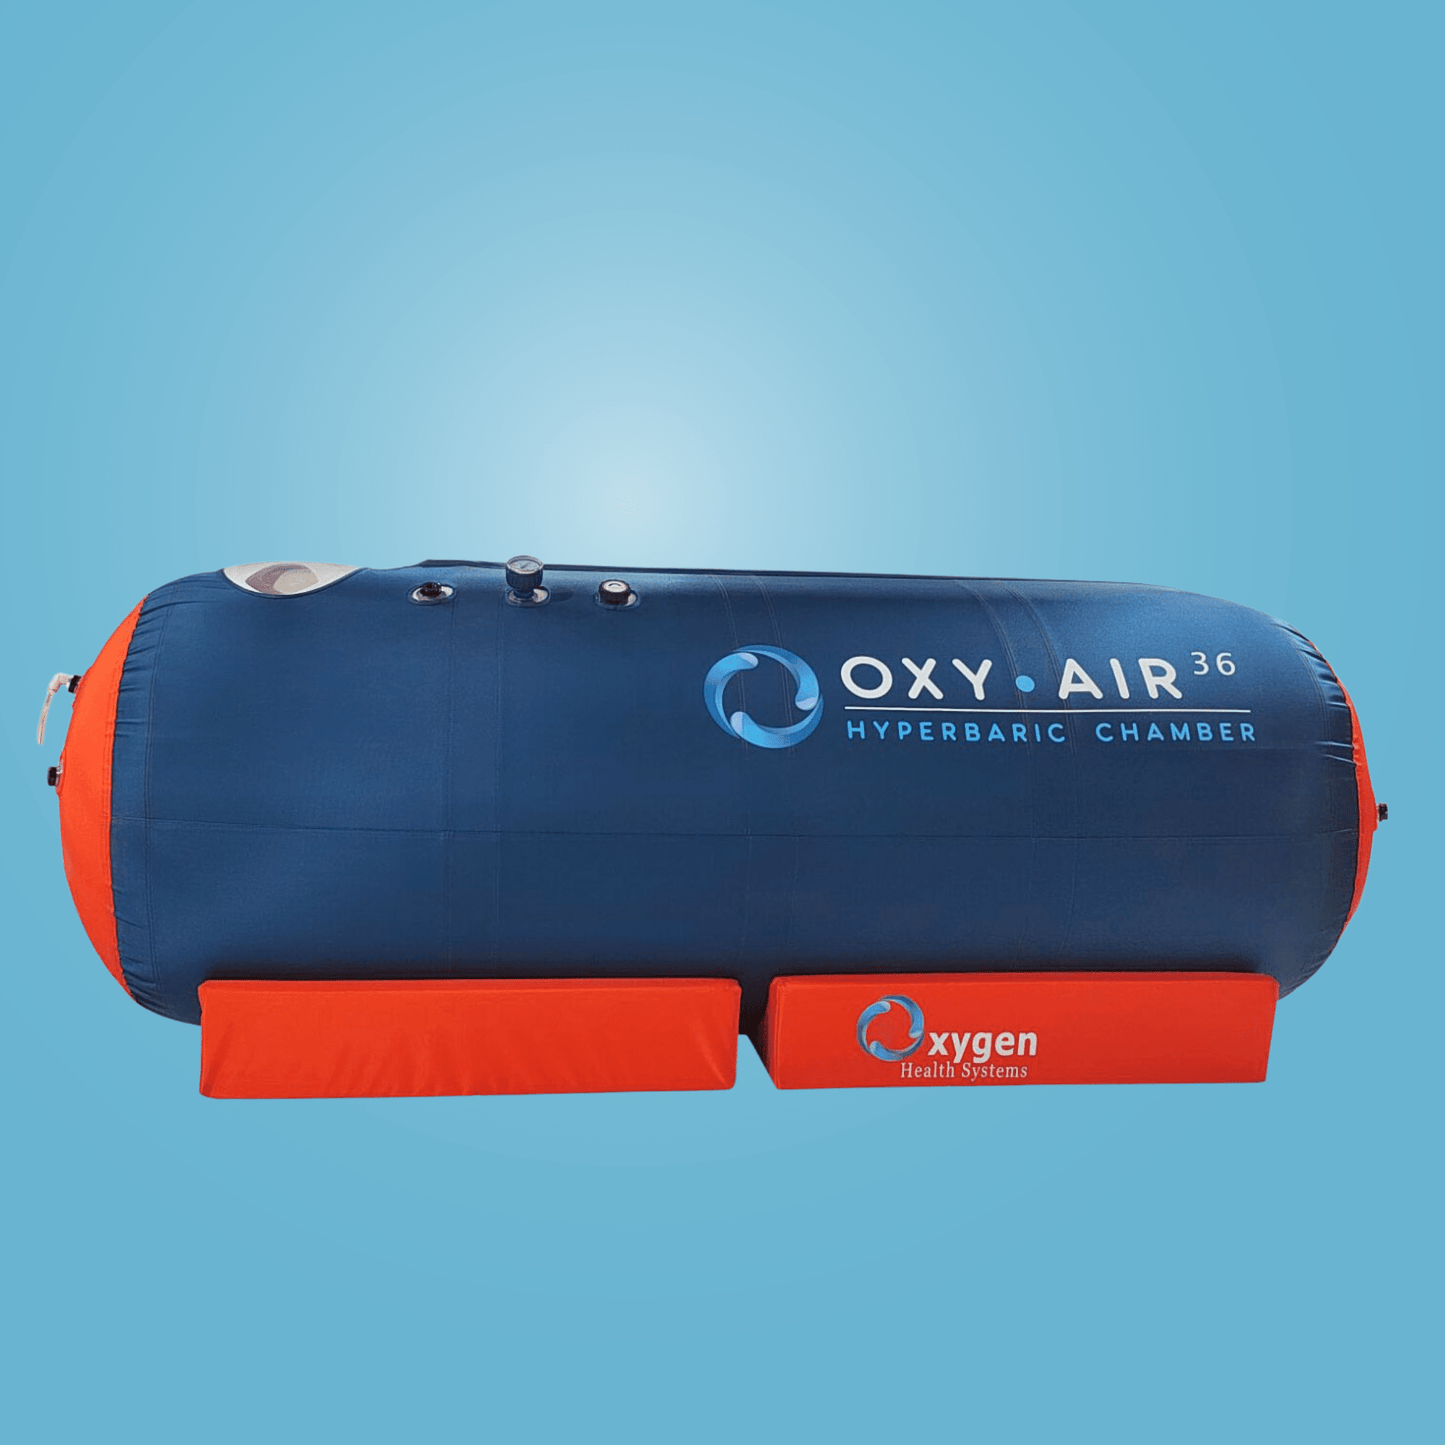 Oxygen Health Systems- Oxy Air Hyperbaric Oxygen Chamber-Healing The Hyperbaric Way